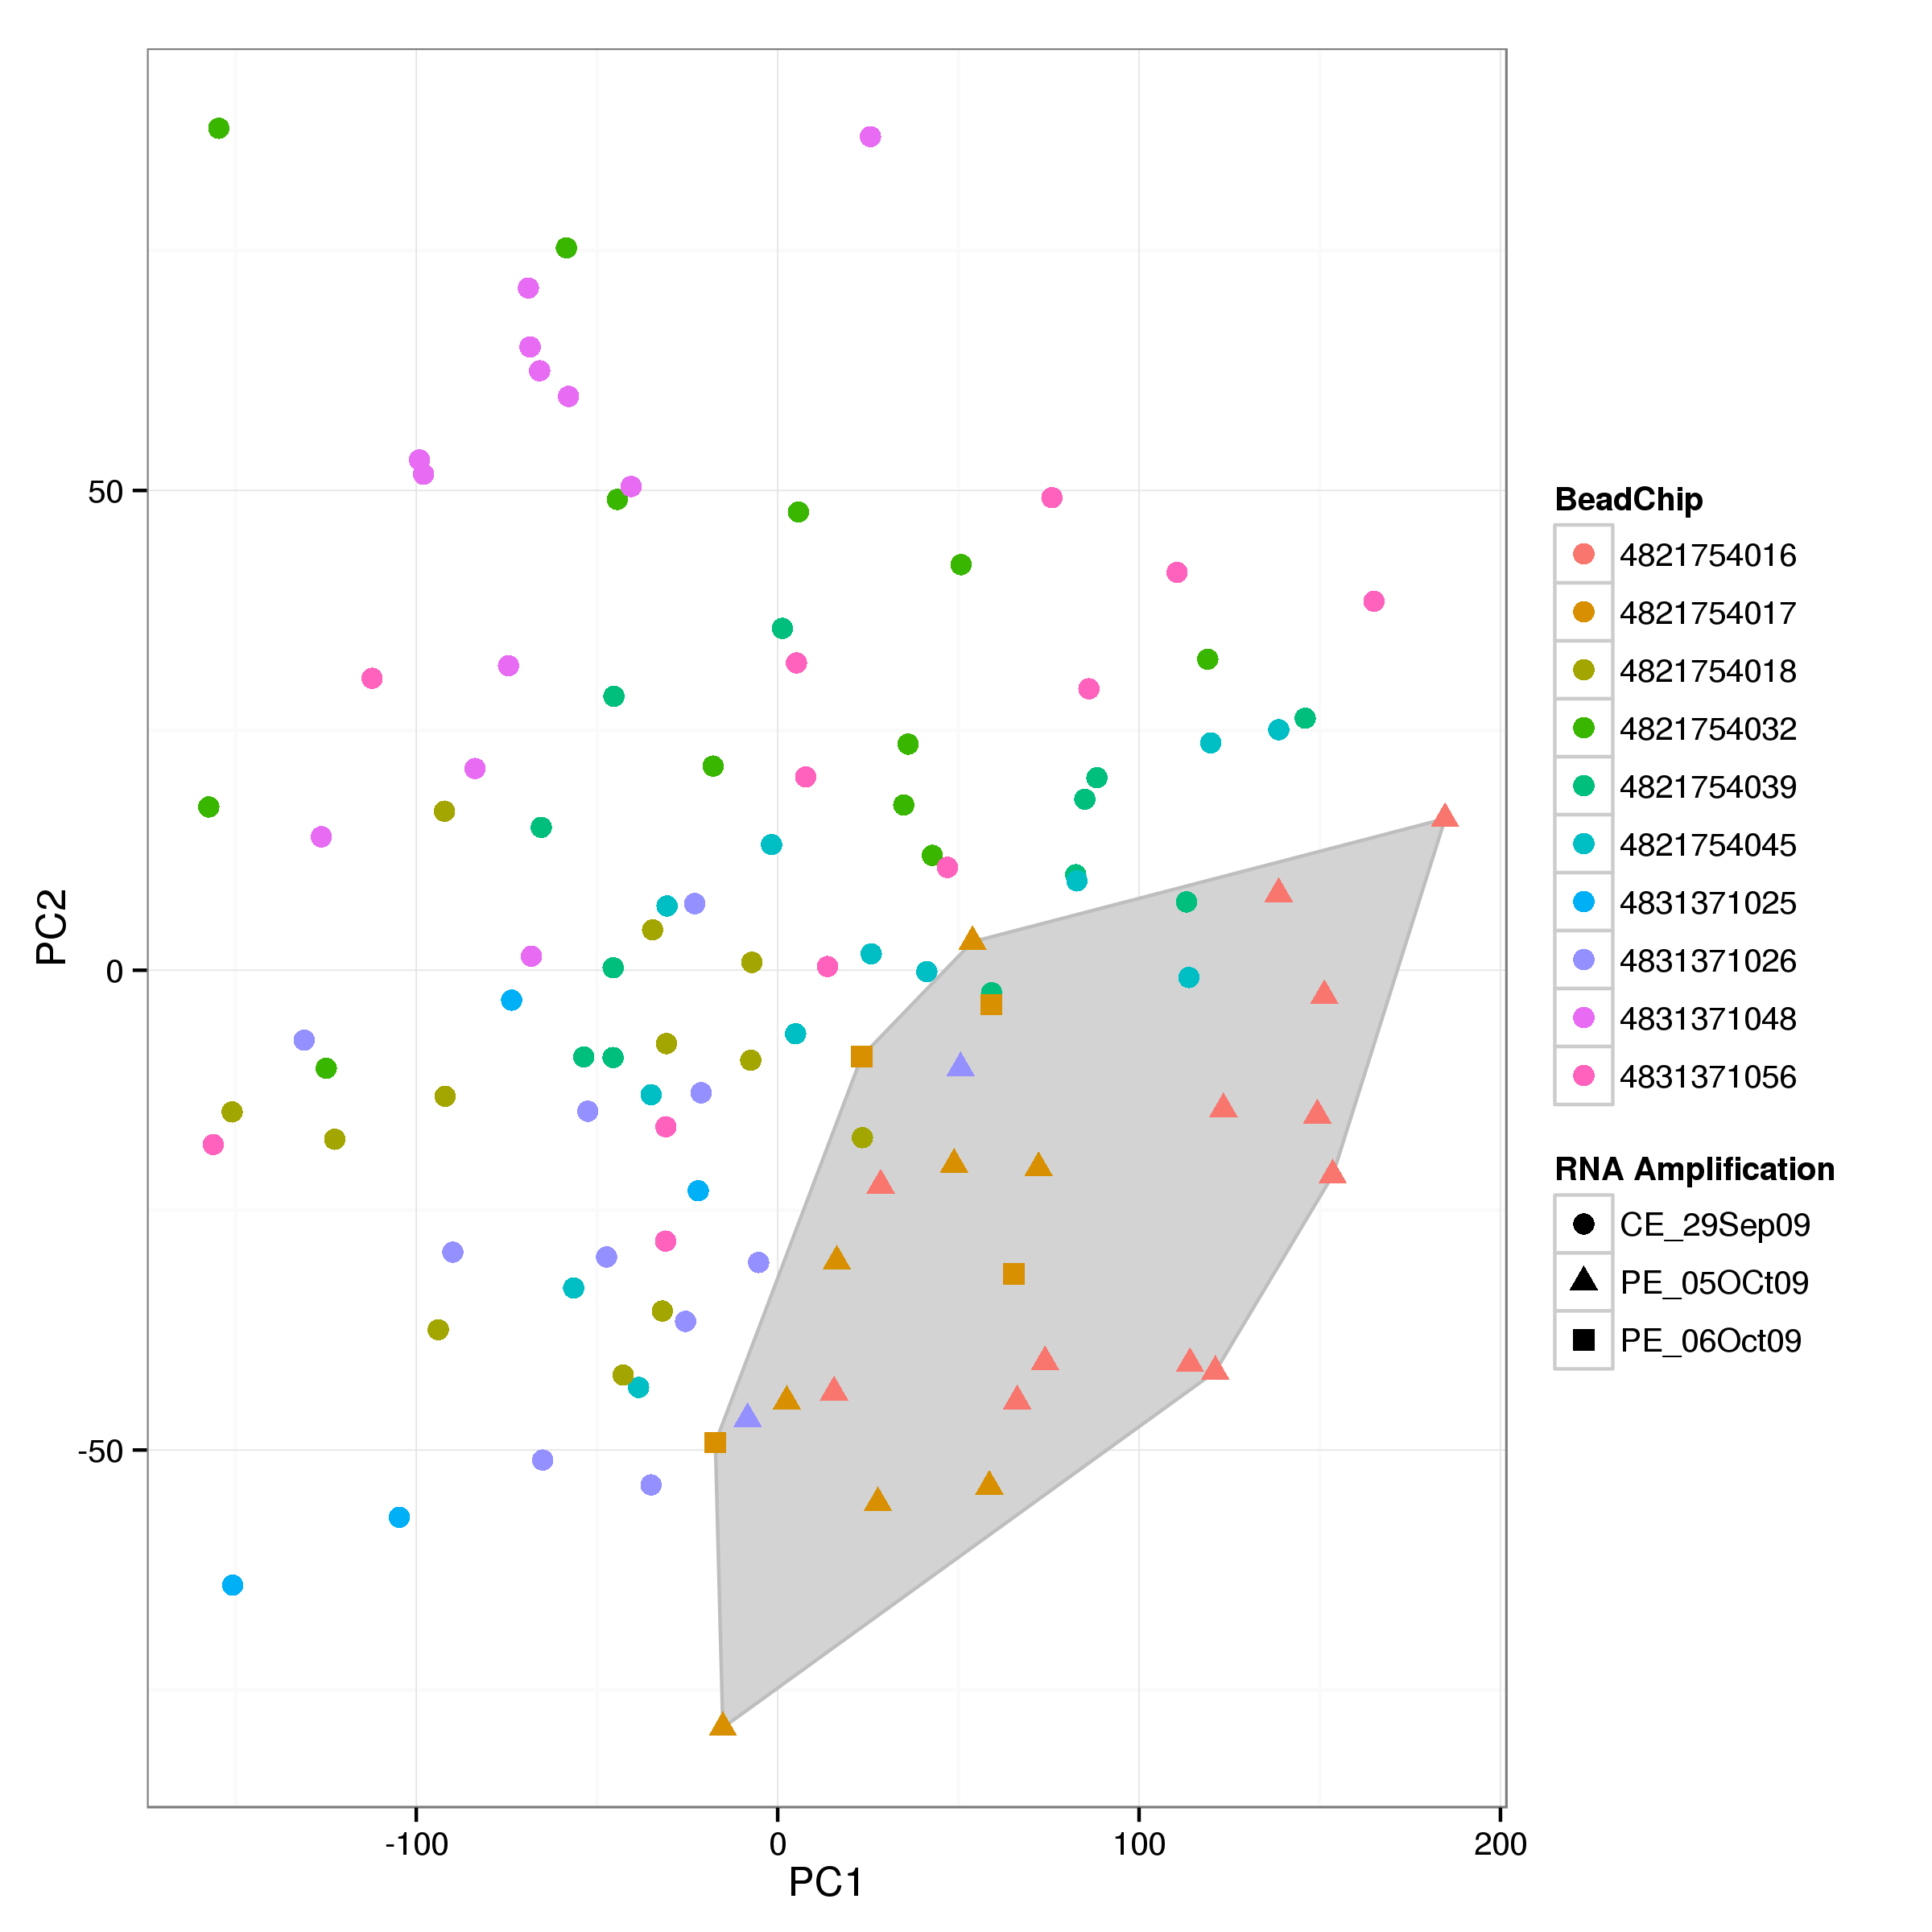 **Figure 2:** PCA plot of probe intensities by sample. Colours correspond to different BeadChips while shapes indicate different amplification dates. Samples from the two amplifications in October 2009 are clustered together (highlighted by the grey area).